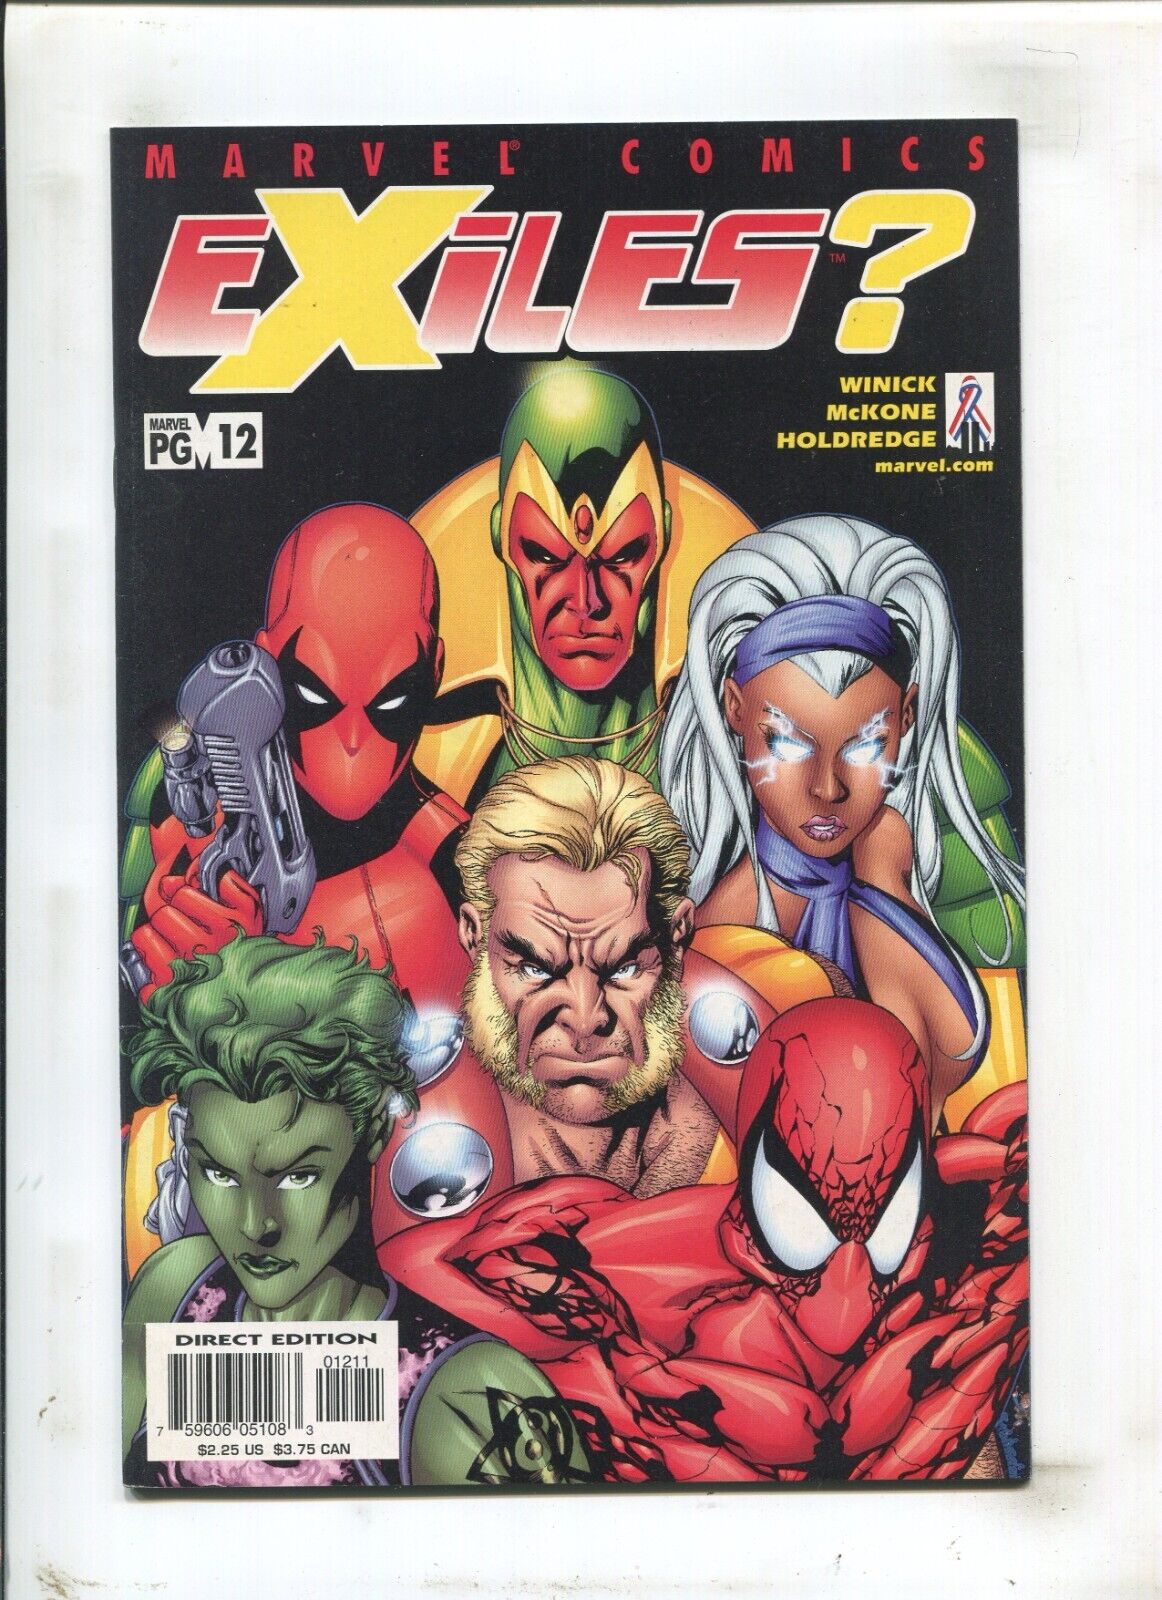 Exiles #12 - Direct Edition / 1st Appearance of Spider-Symbiote (9.2) 2002